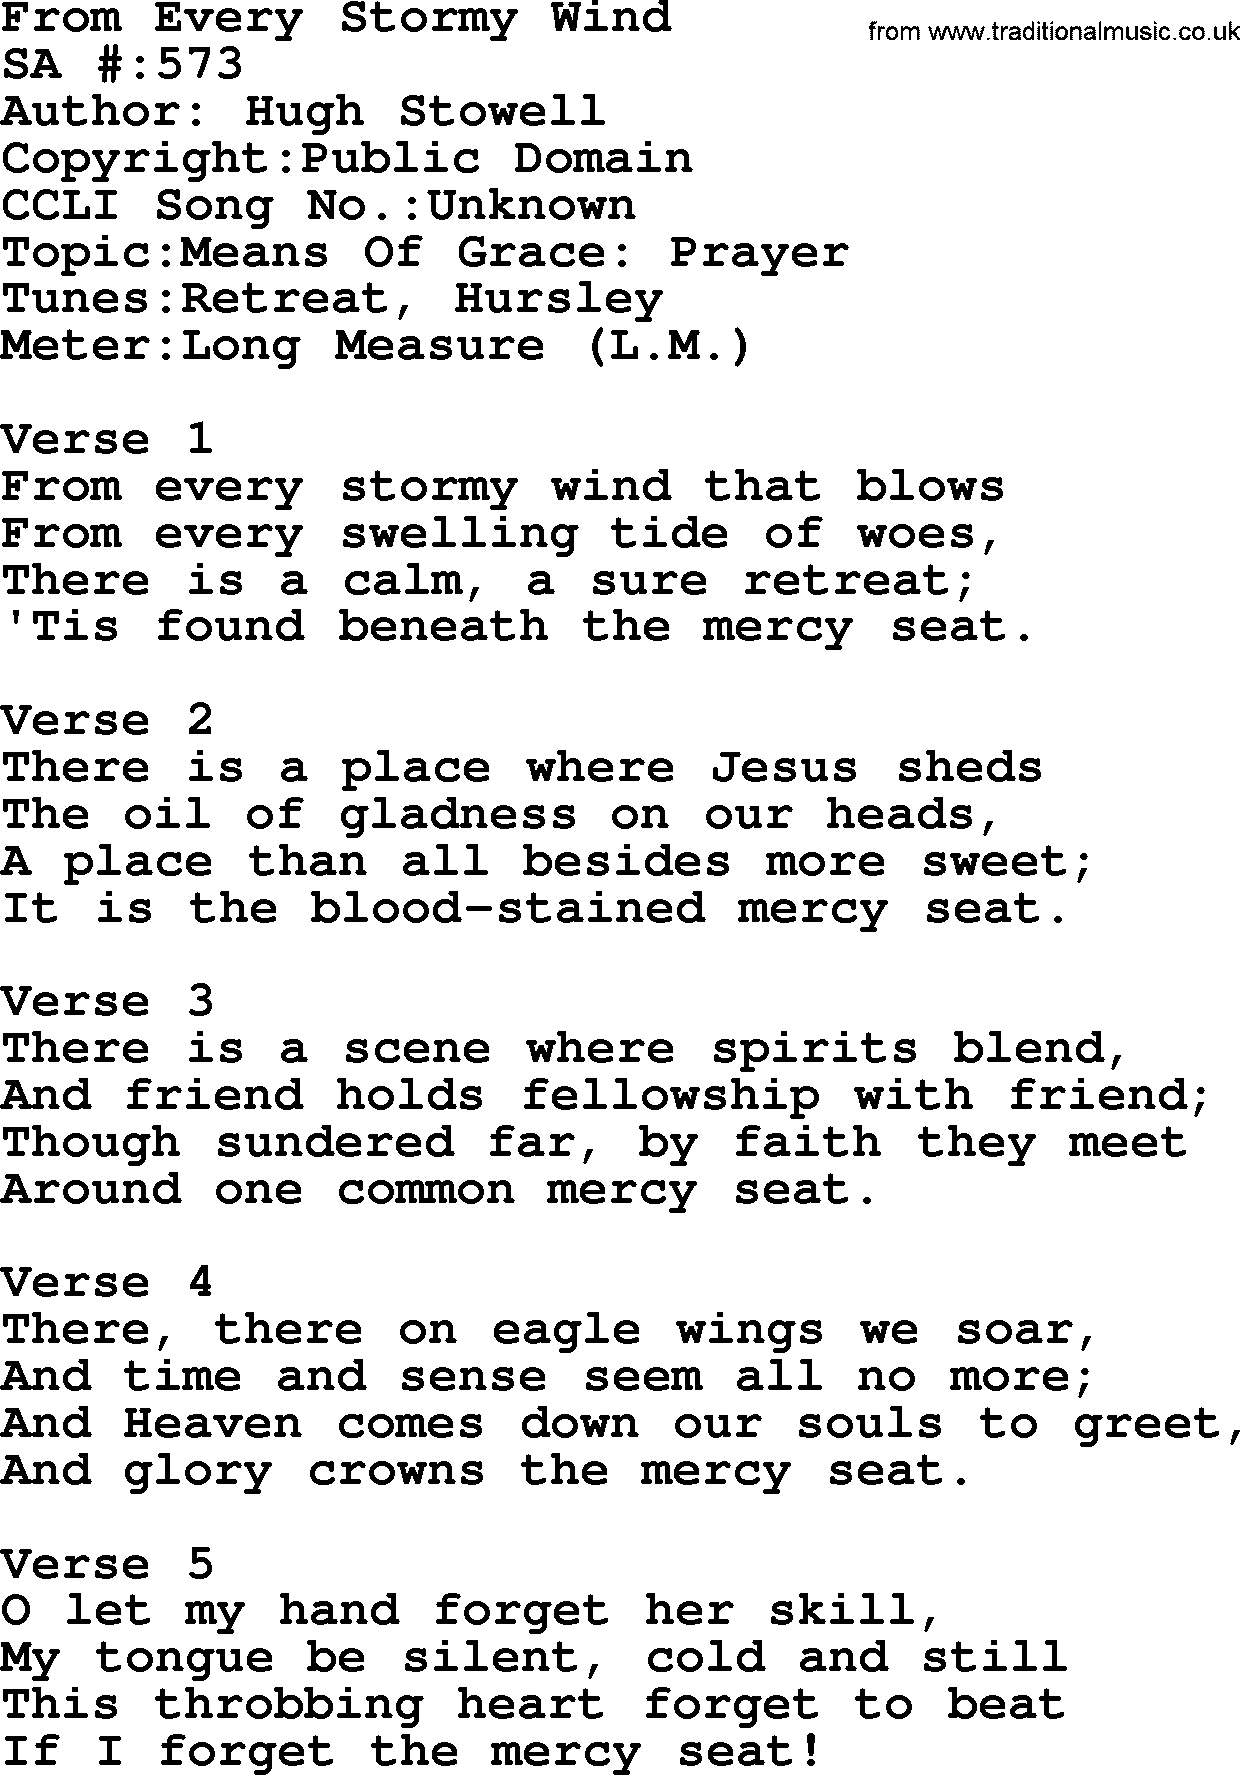 Salvation Army Hymnal, title: From Every Stormy Wind, with lyrics and PDF,